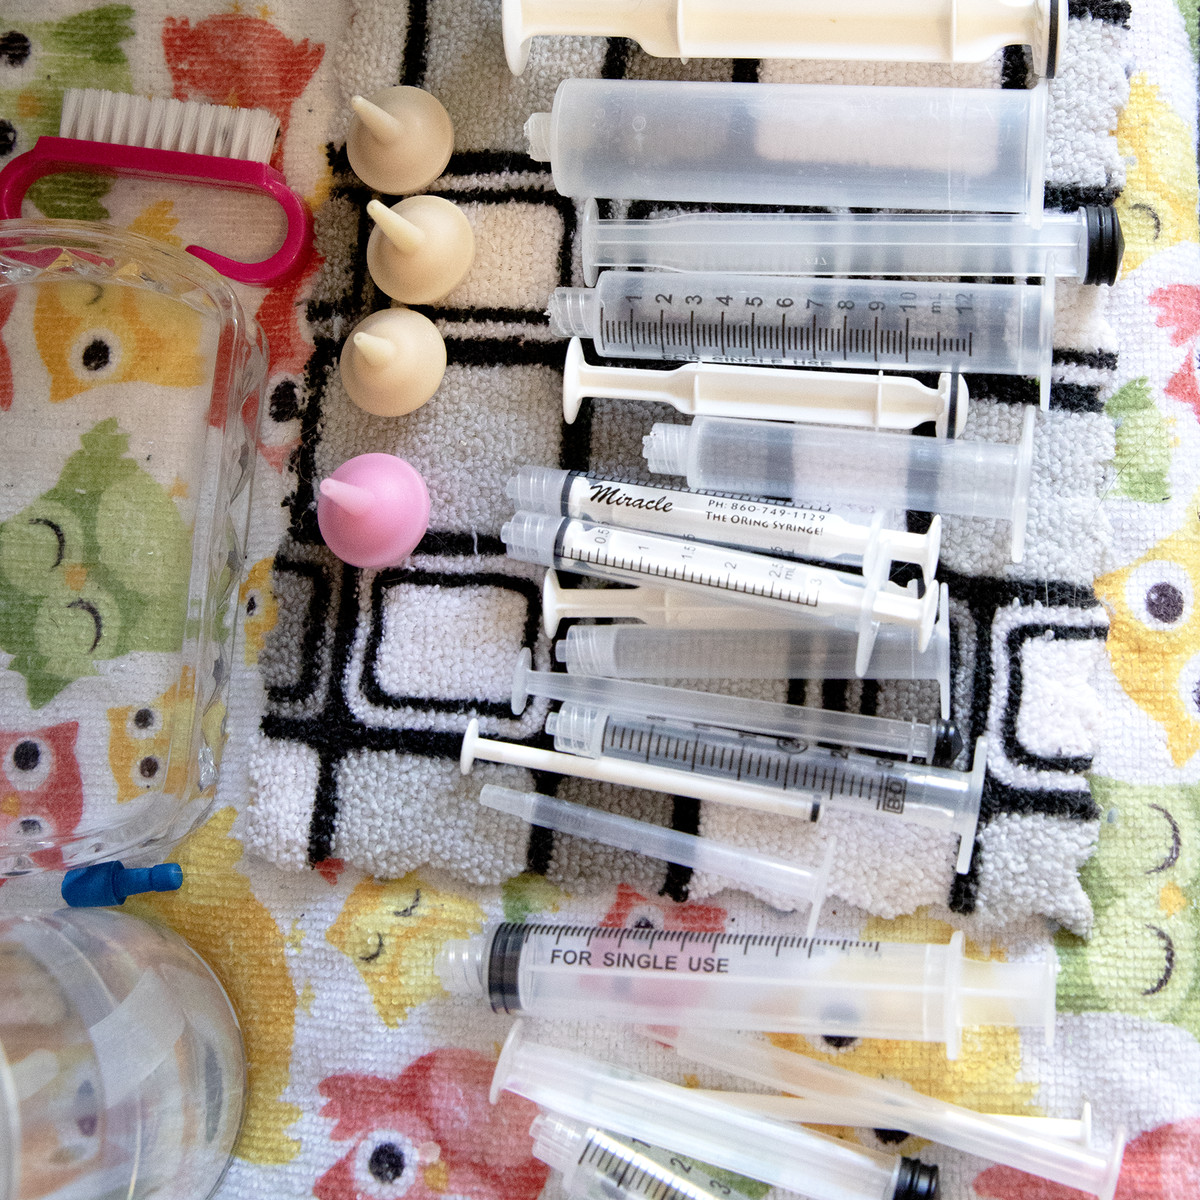 Plastic syringes laid out on a blanket.